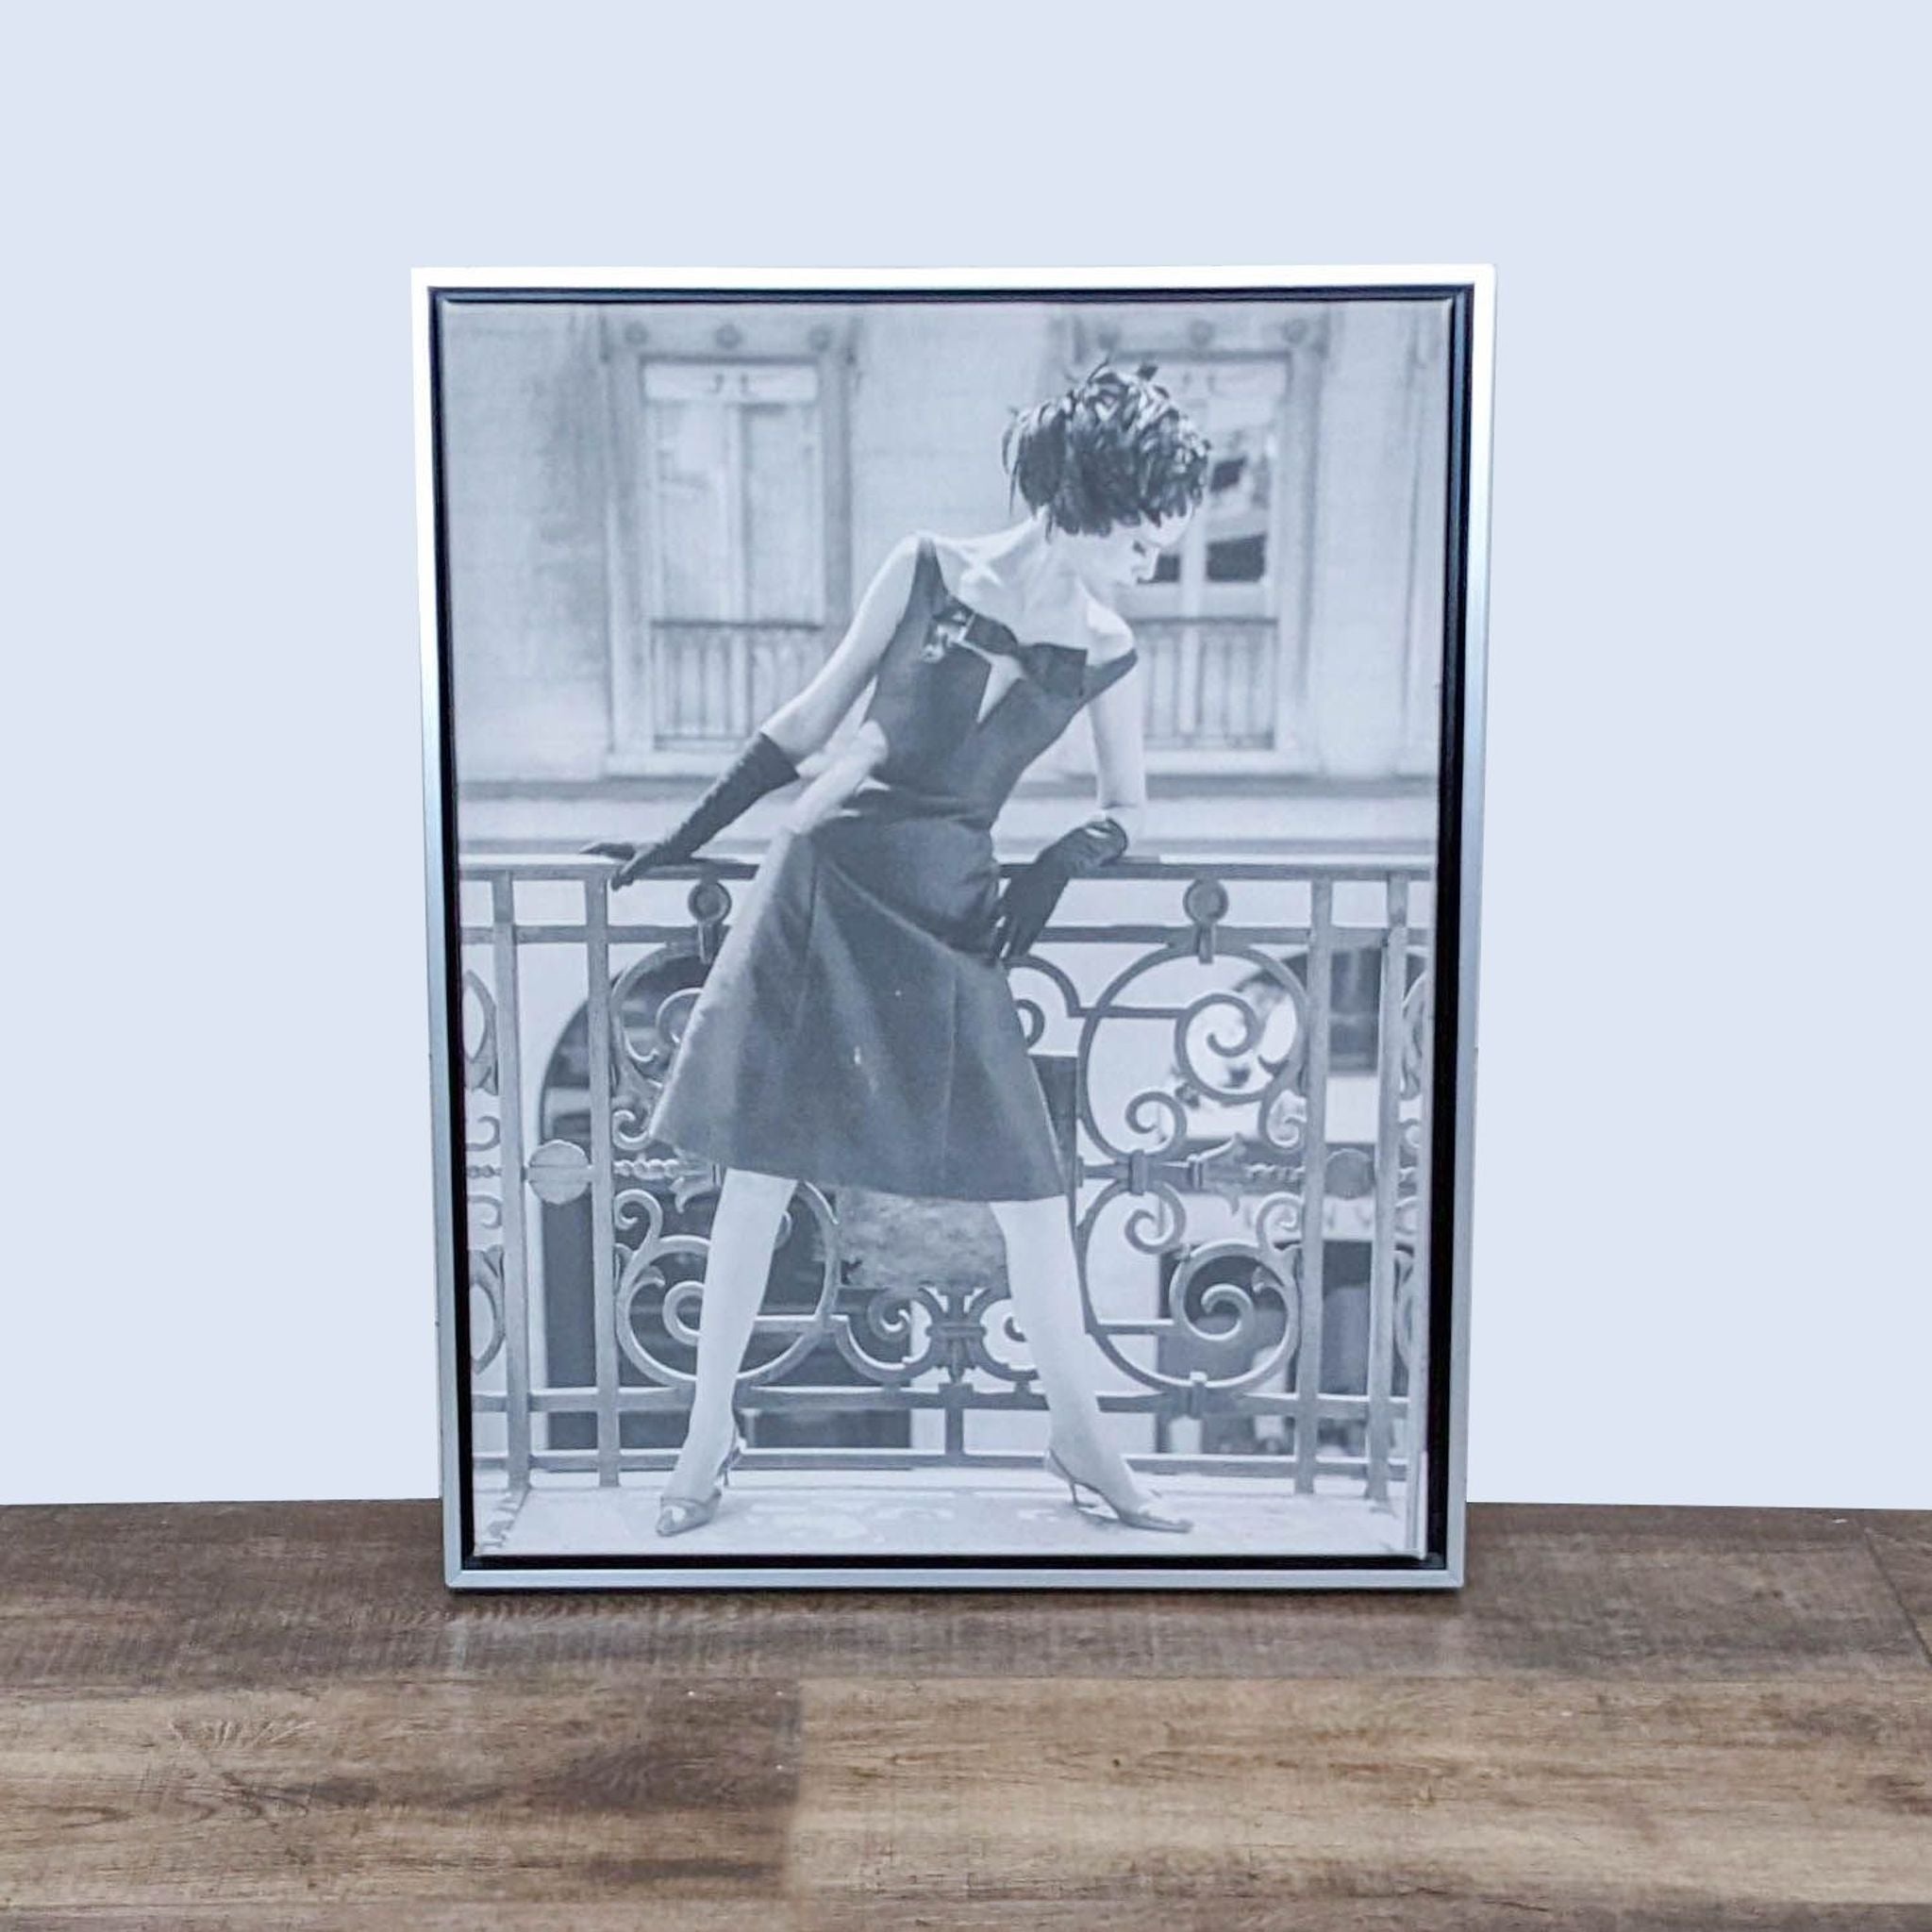 1. "Framed Reperch print of a woman in a 1960s evening gown and feathered hat, displayed on a wooden floor."